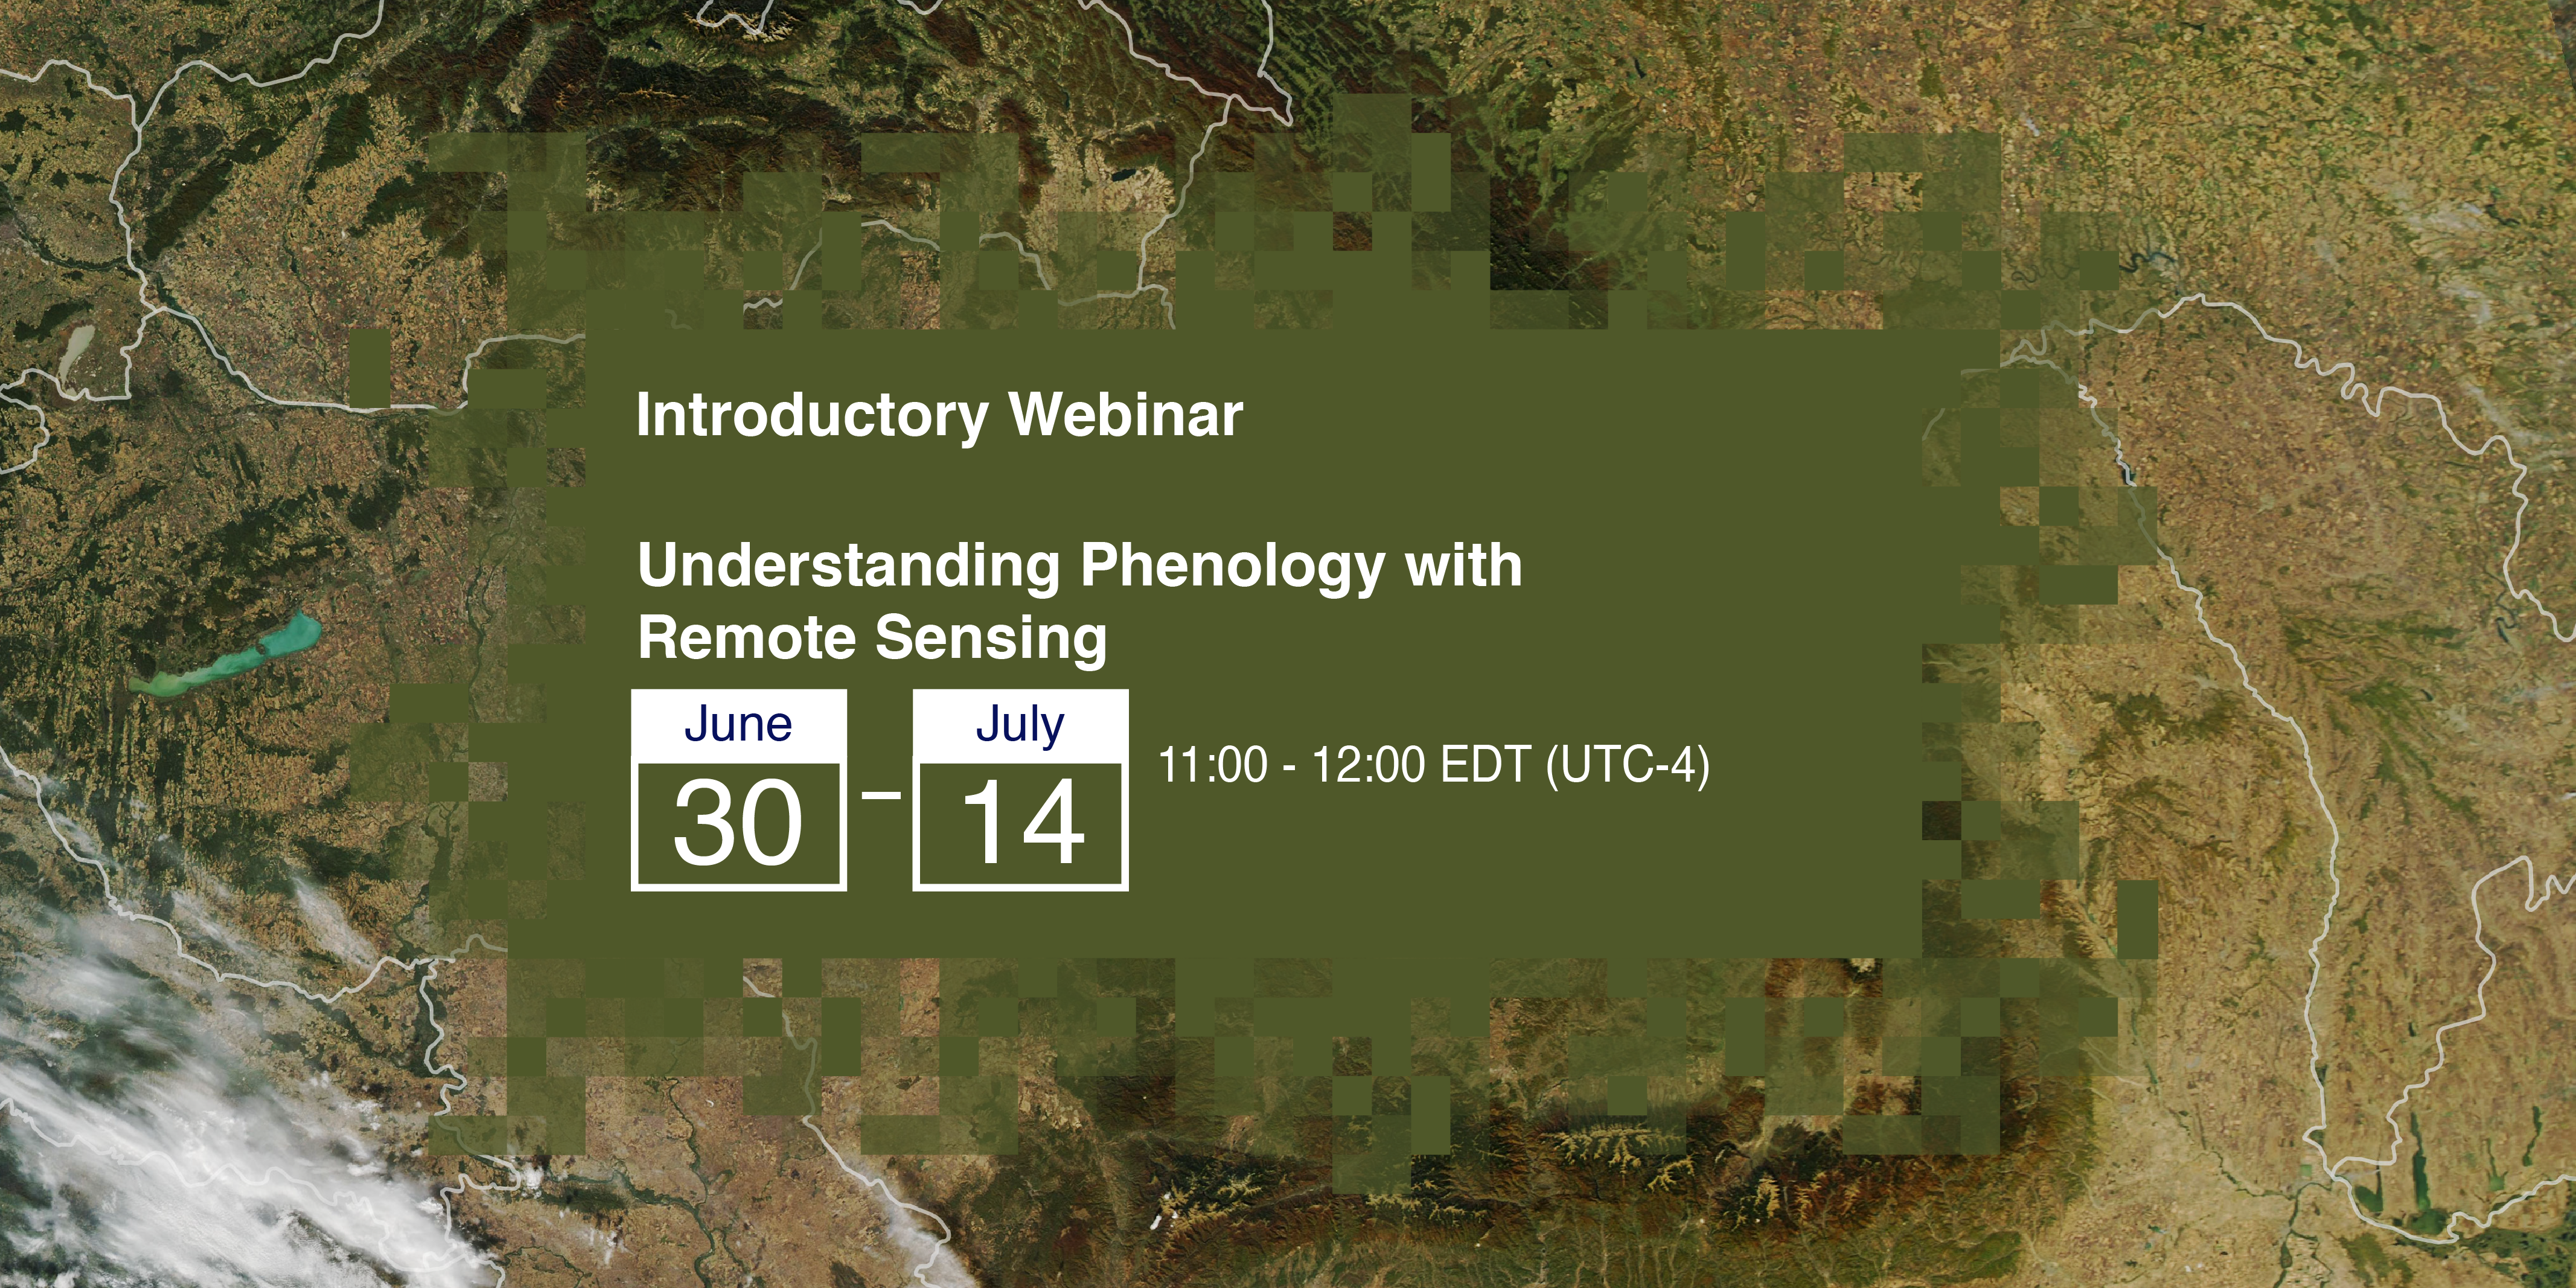 Understanding Phenology with Remote Sensing&nbsp;This training will focus on the use of remote sensing to understand phenology: the study of life-cy...